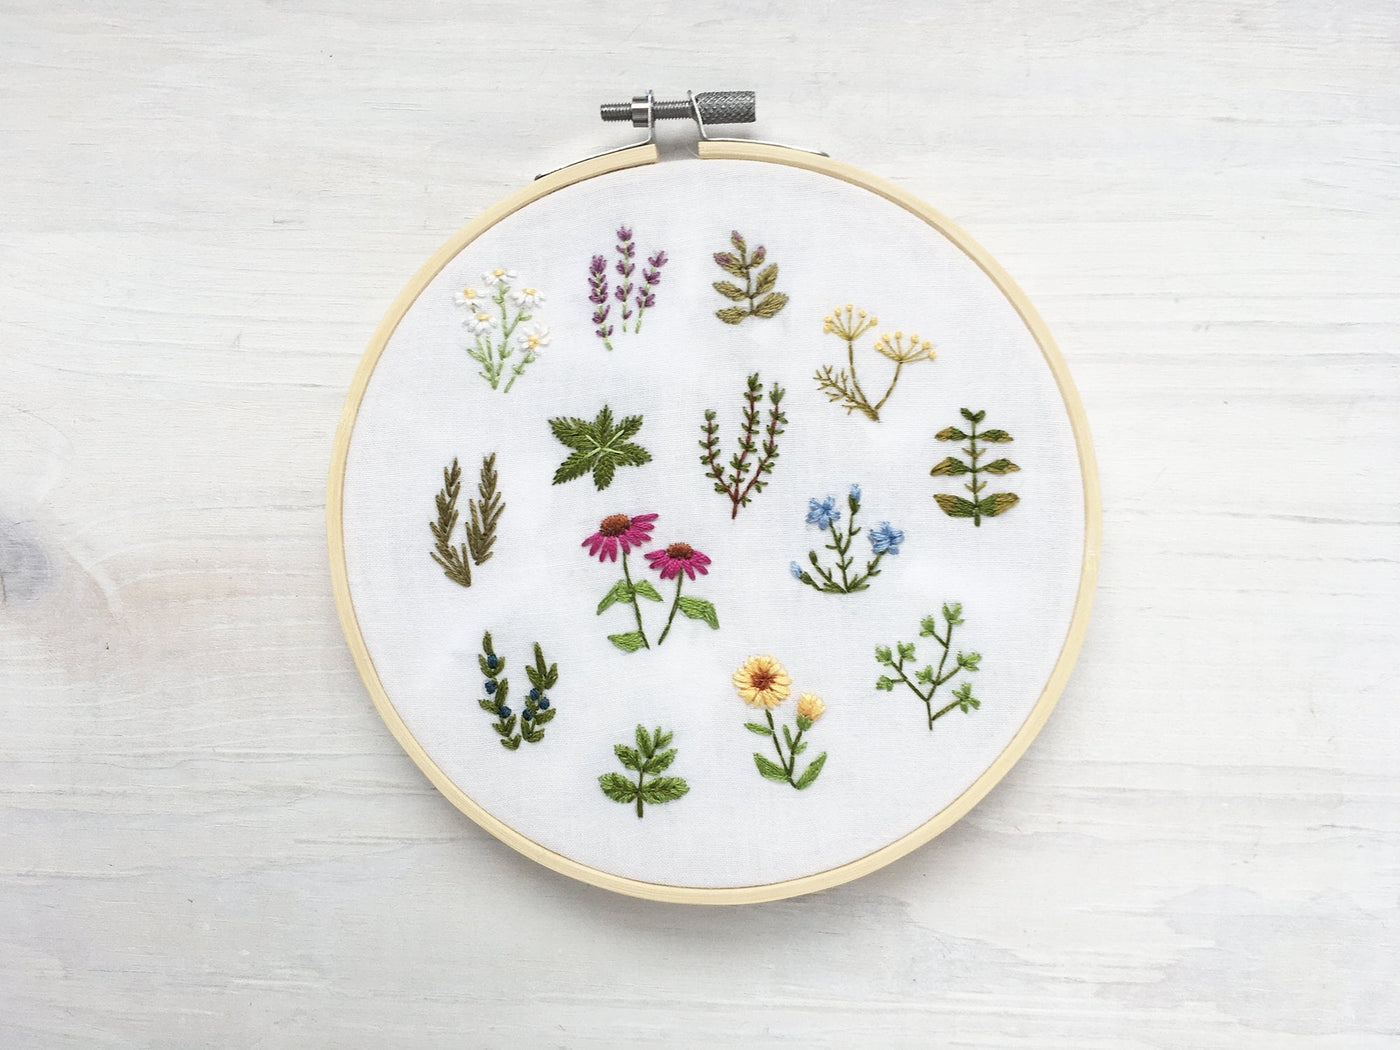 Tiny Herbs Hand Embroidery pattern download